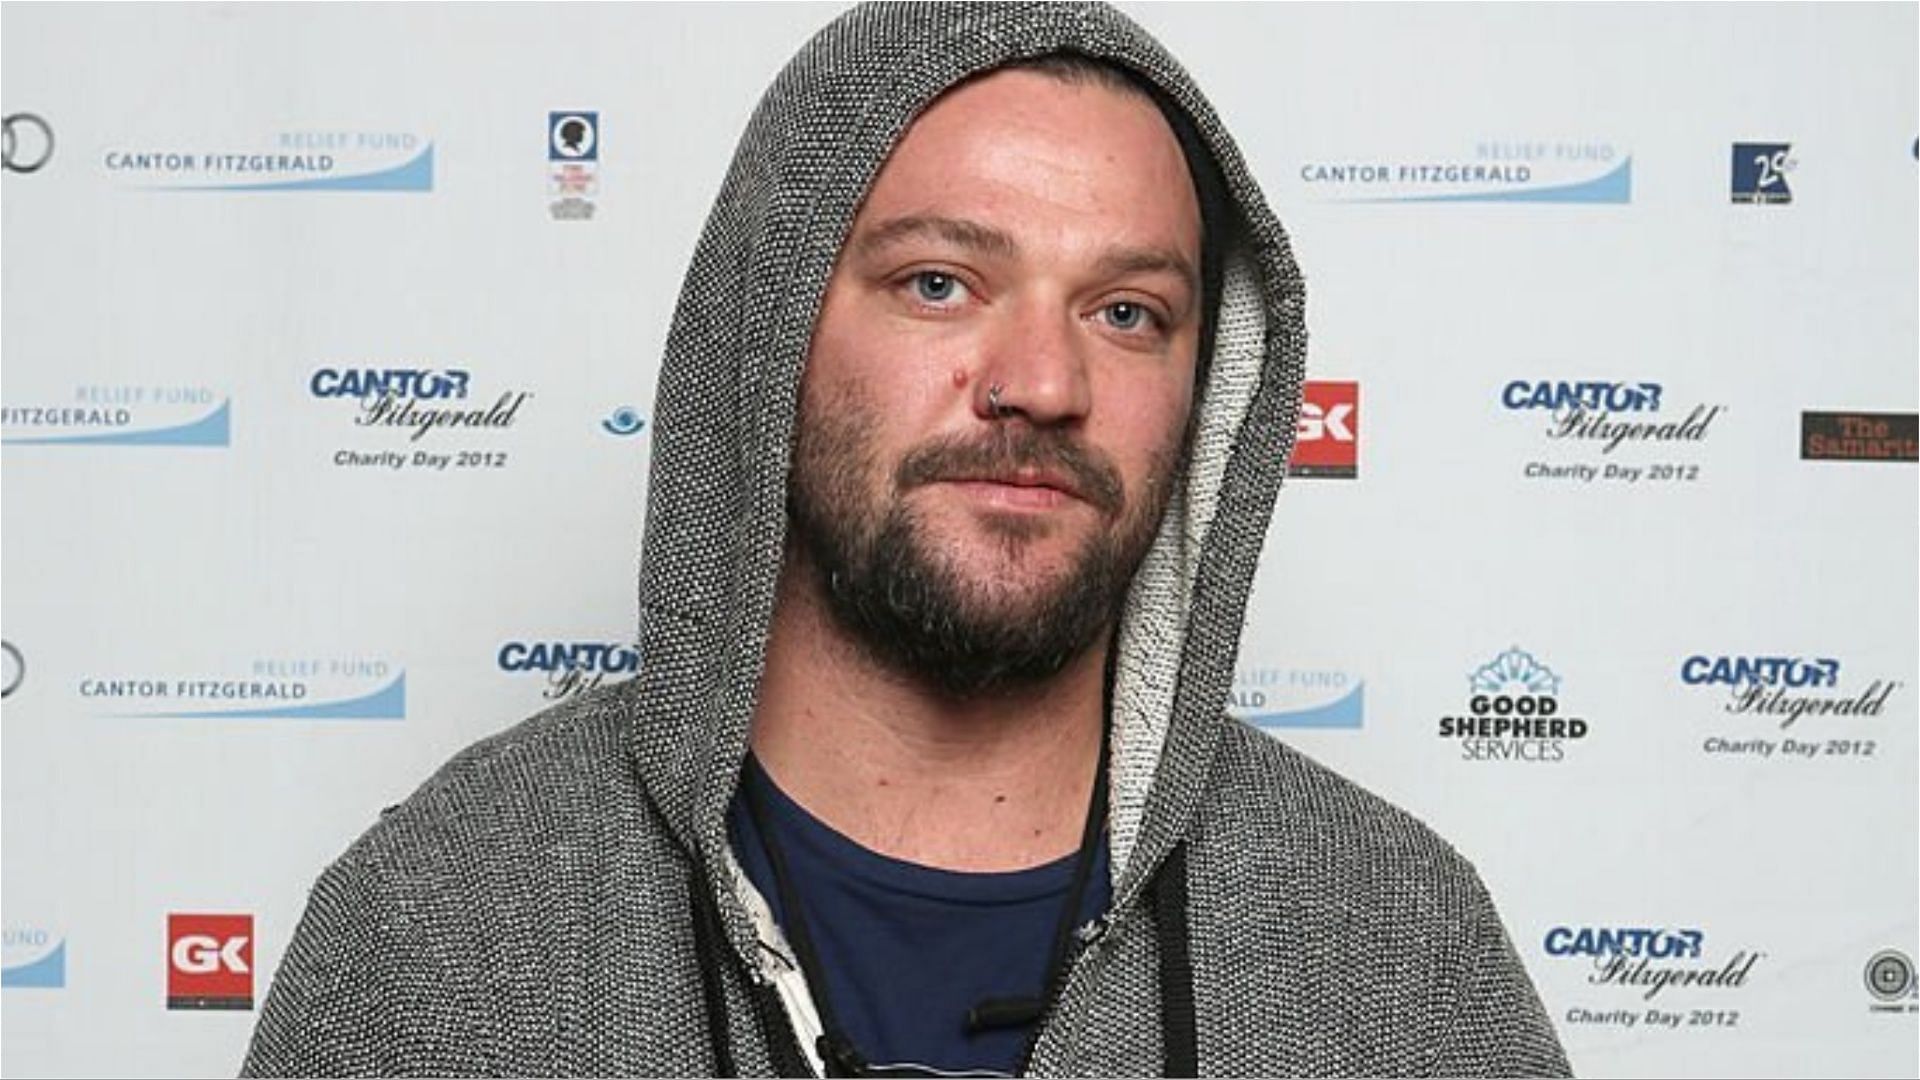 Bam Margera has turned himself in after being searched by the authorities (Image via Mike McGregor/Getty Images)